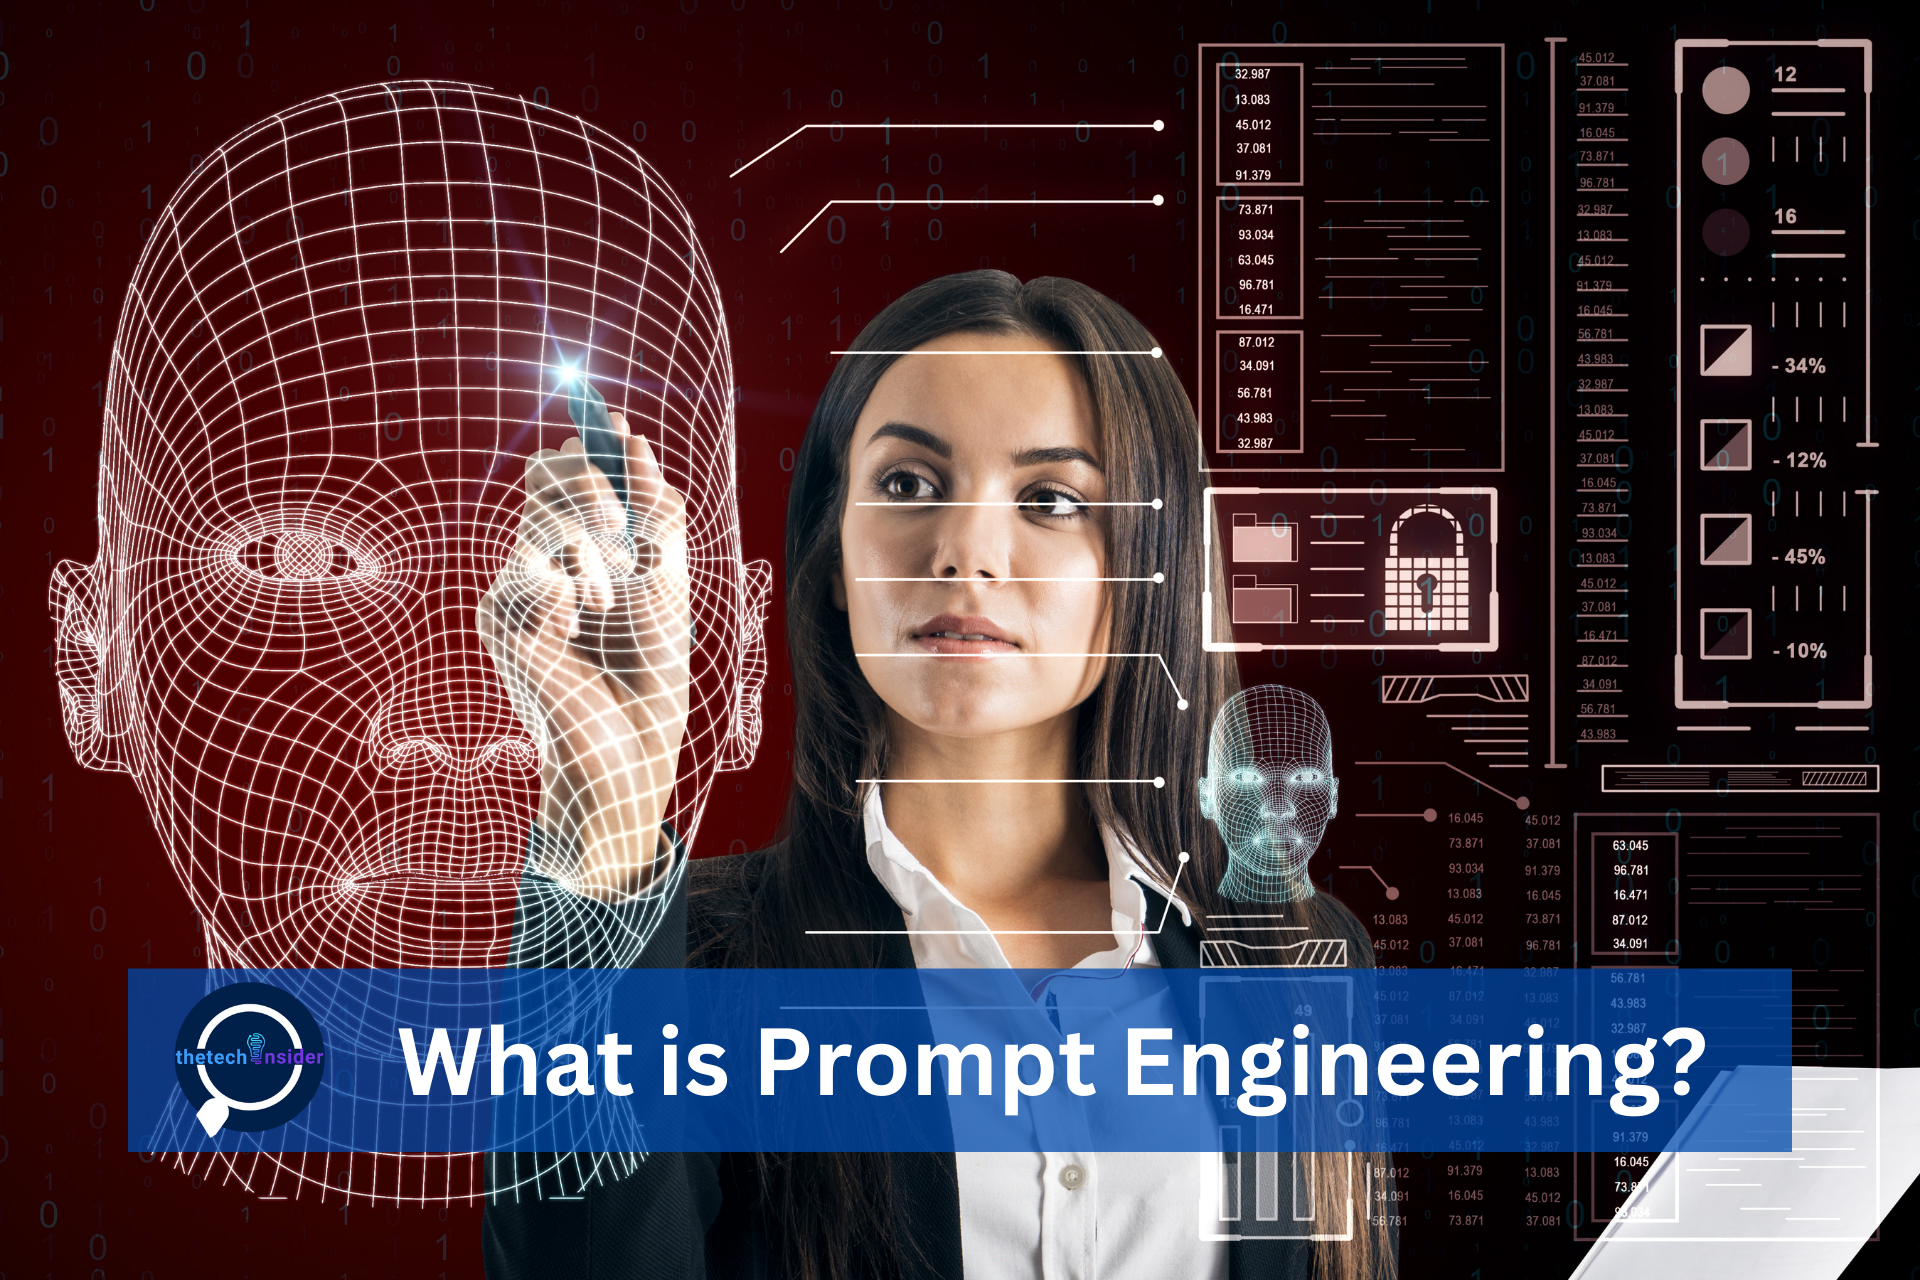 Details about what is Prompt engineering?